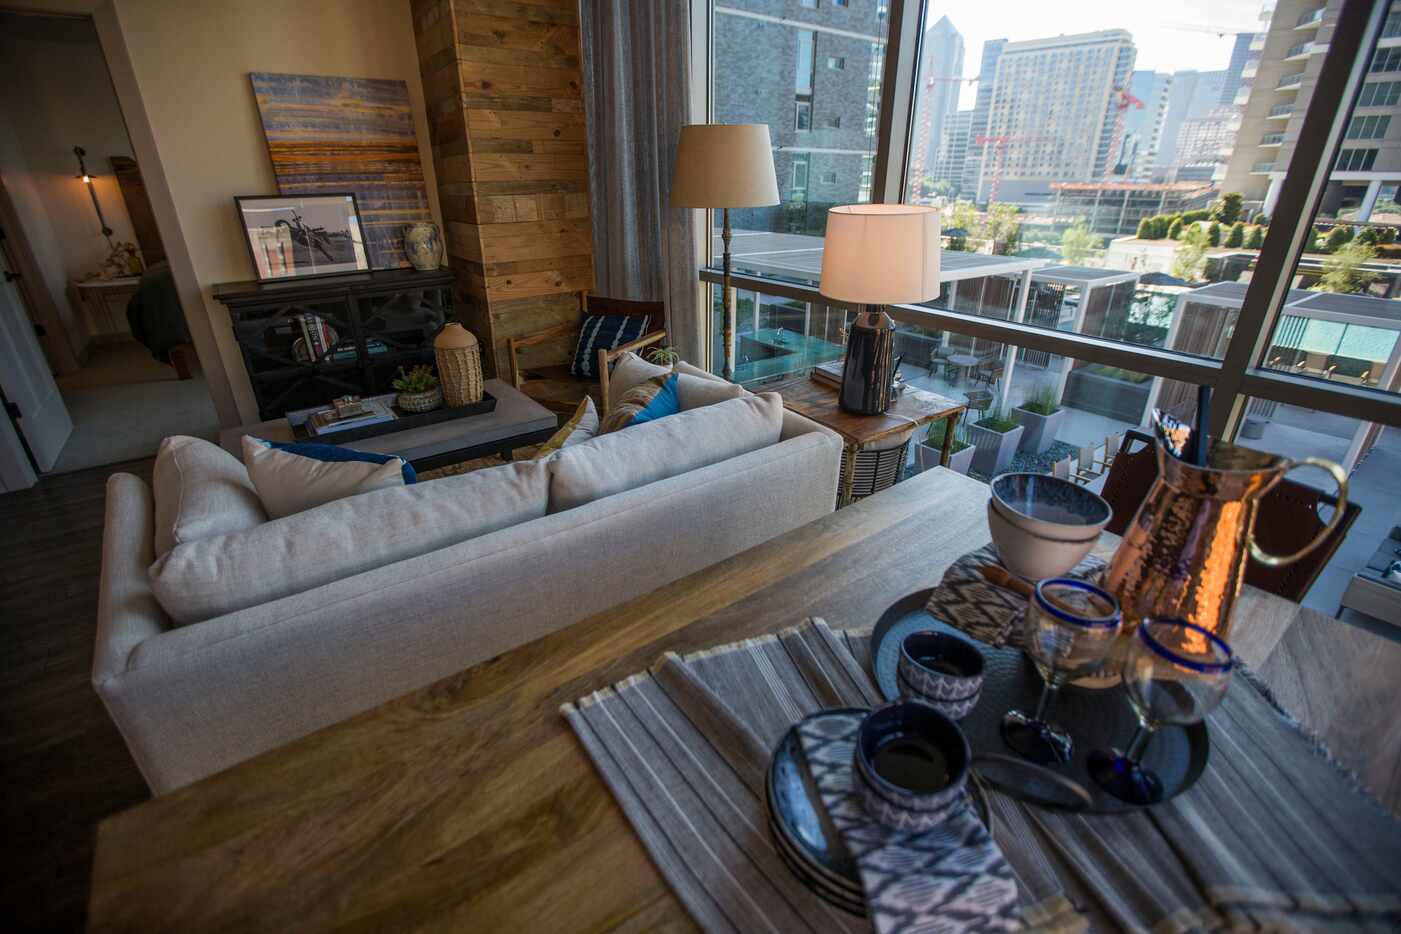 The living room in a model apartment at the new Ascent Victory Park apartments.